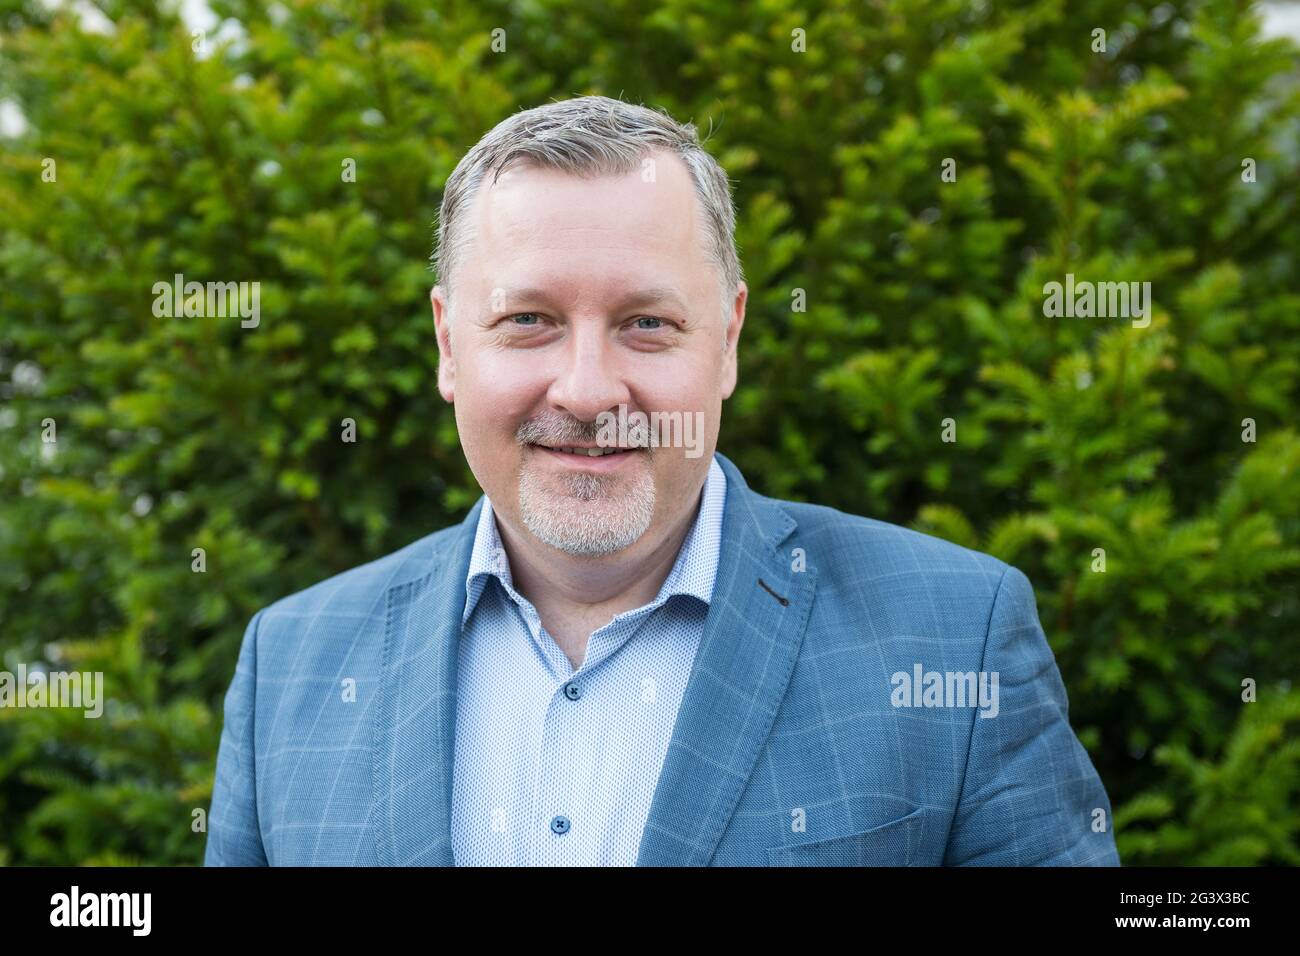 Pisek, Czech Republic. 17th June, 2021. Vladimir Tichy, Country General Manager of the Schneider Electric company, poses on June 17, 2021, in Pisek, Czech Republic. The multinational company manufactures electrical machines, devices and electronic equipment. Credit: Petr Skrivanek/CTK Photo/Alamy Live News Stock Photo